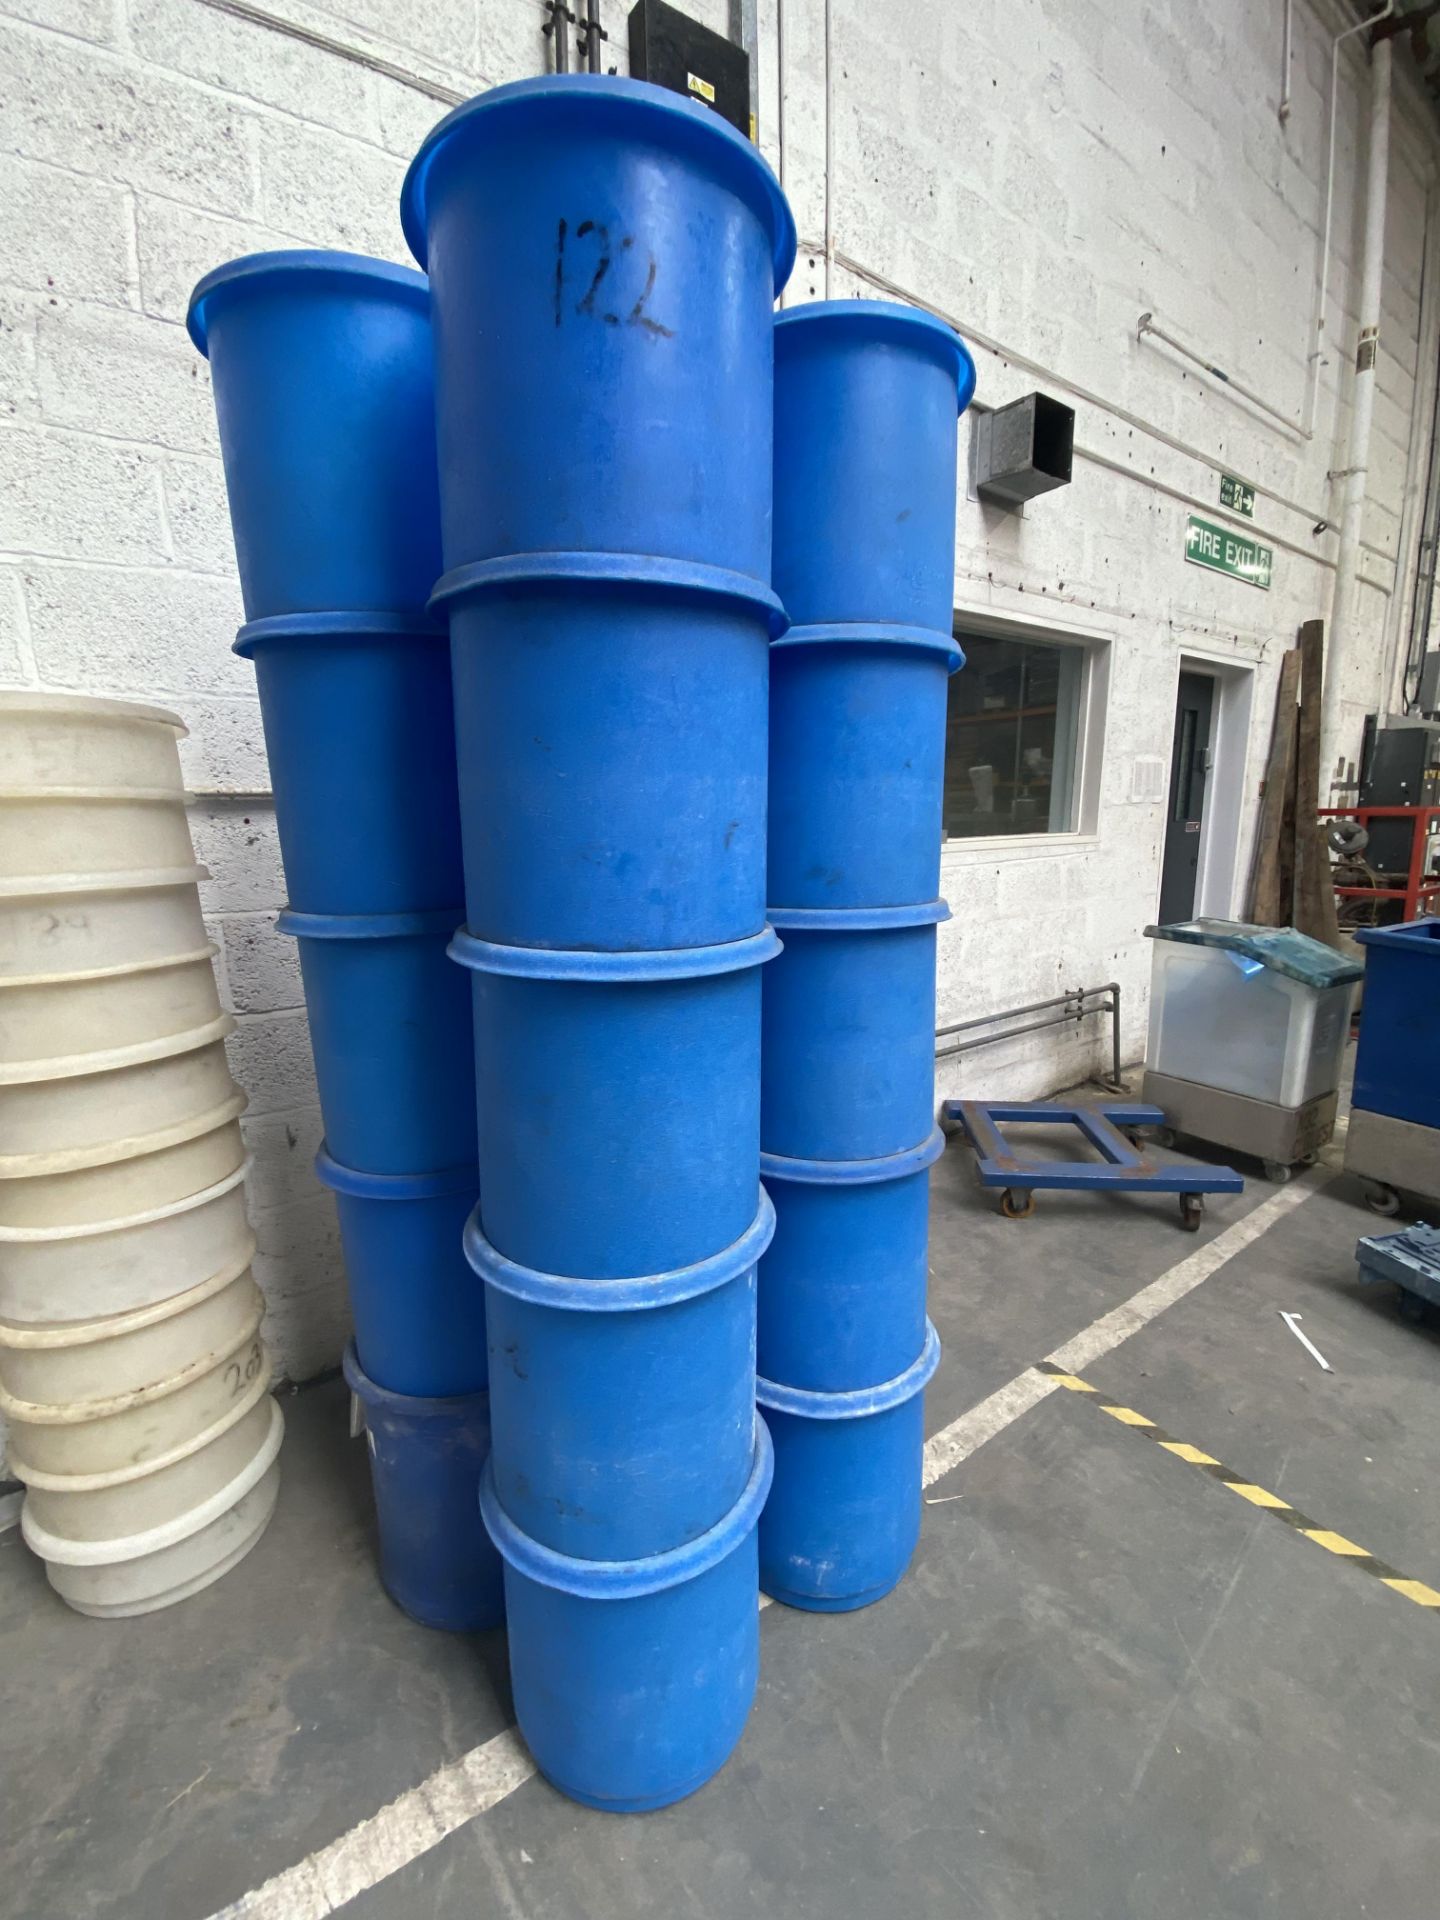 15 Heavy Duty Large Mixing Tubs, with lids, loadin